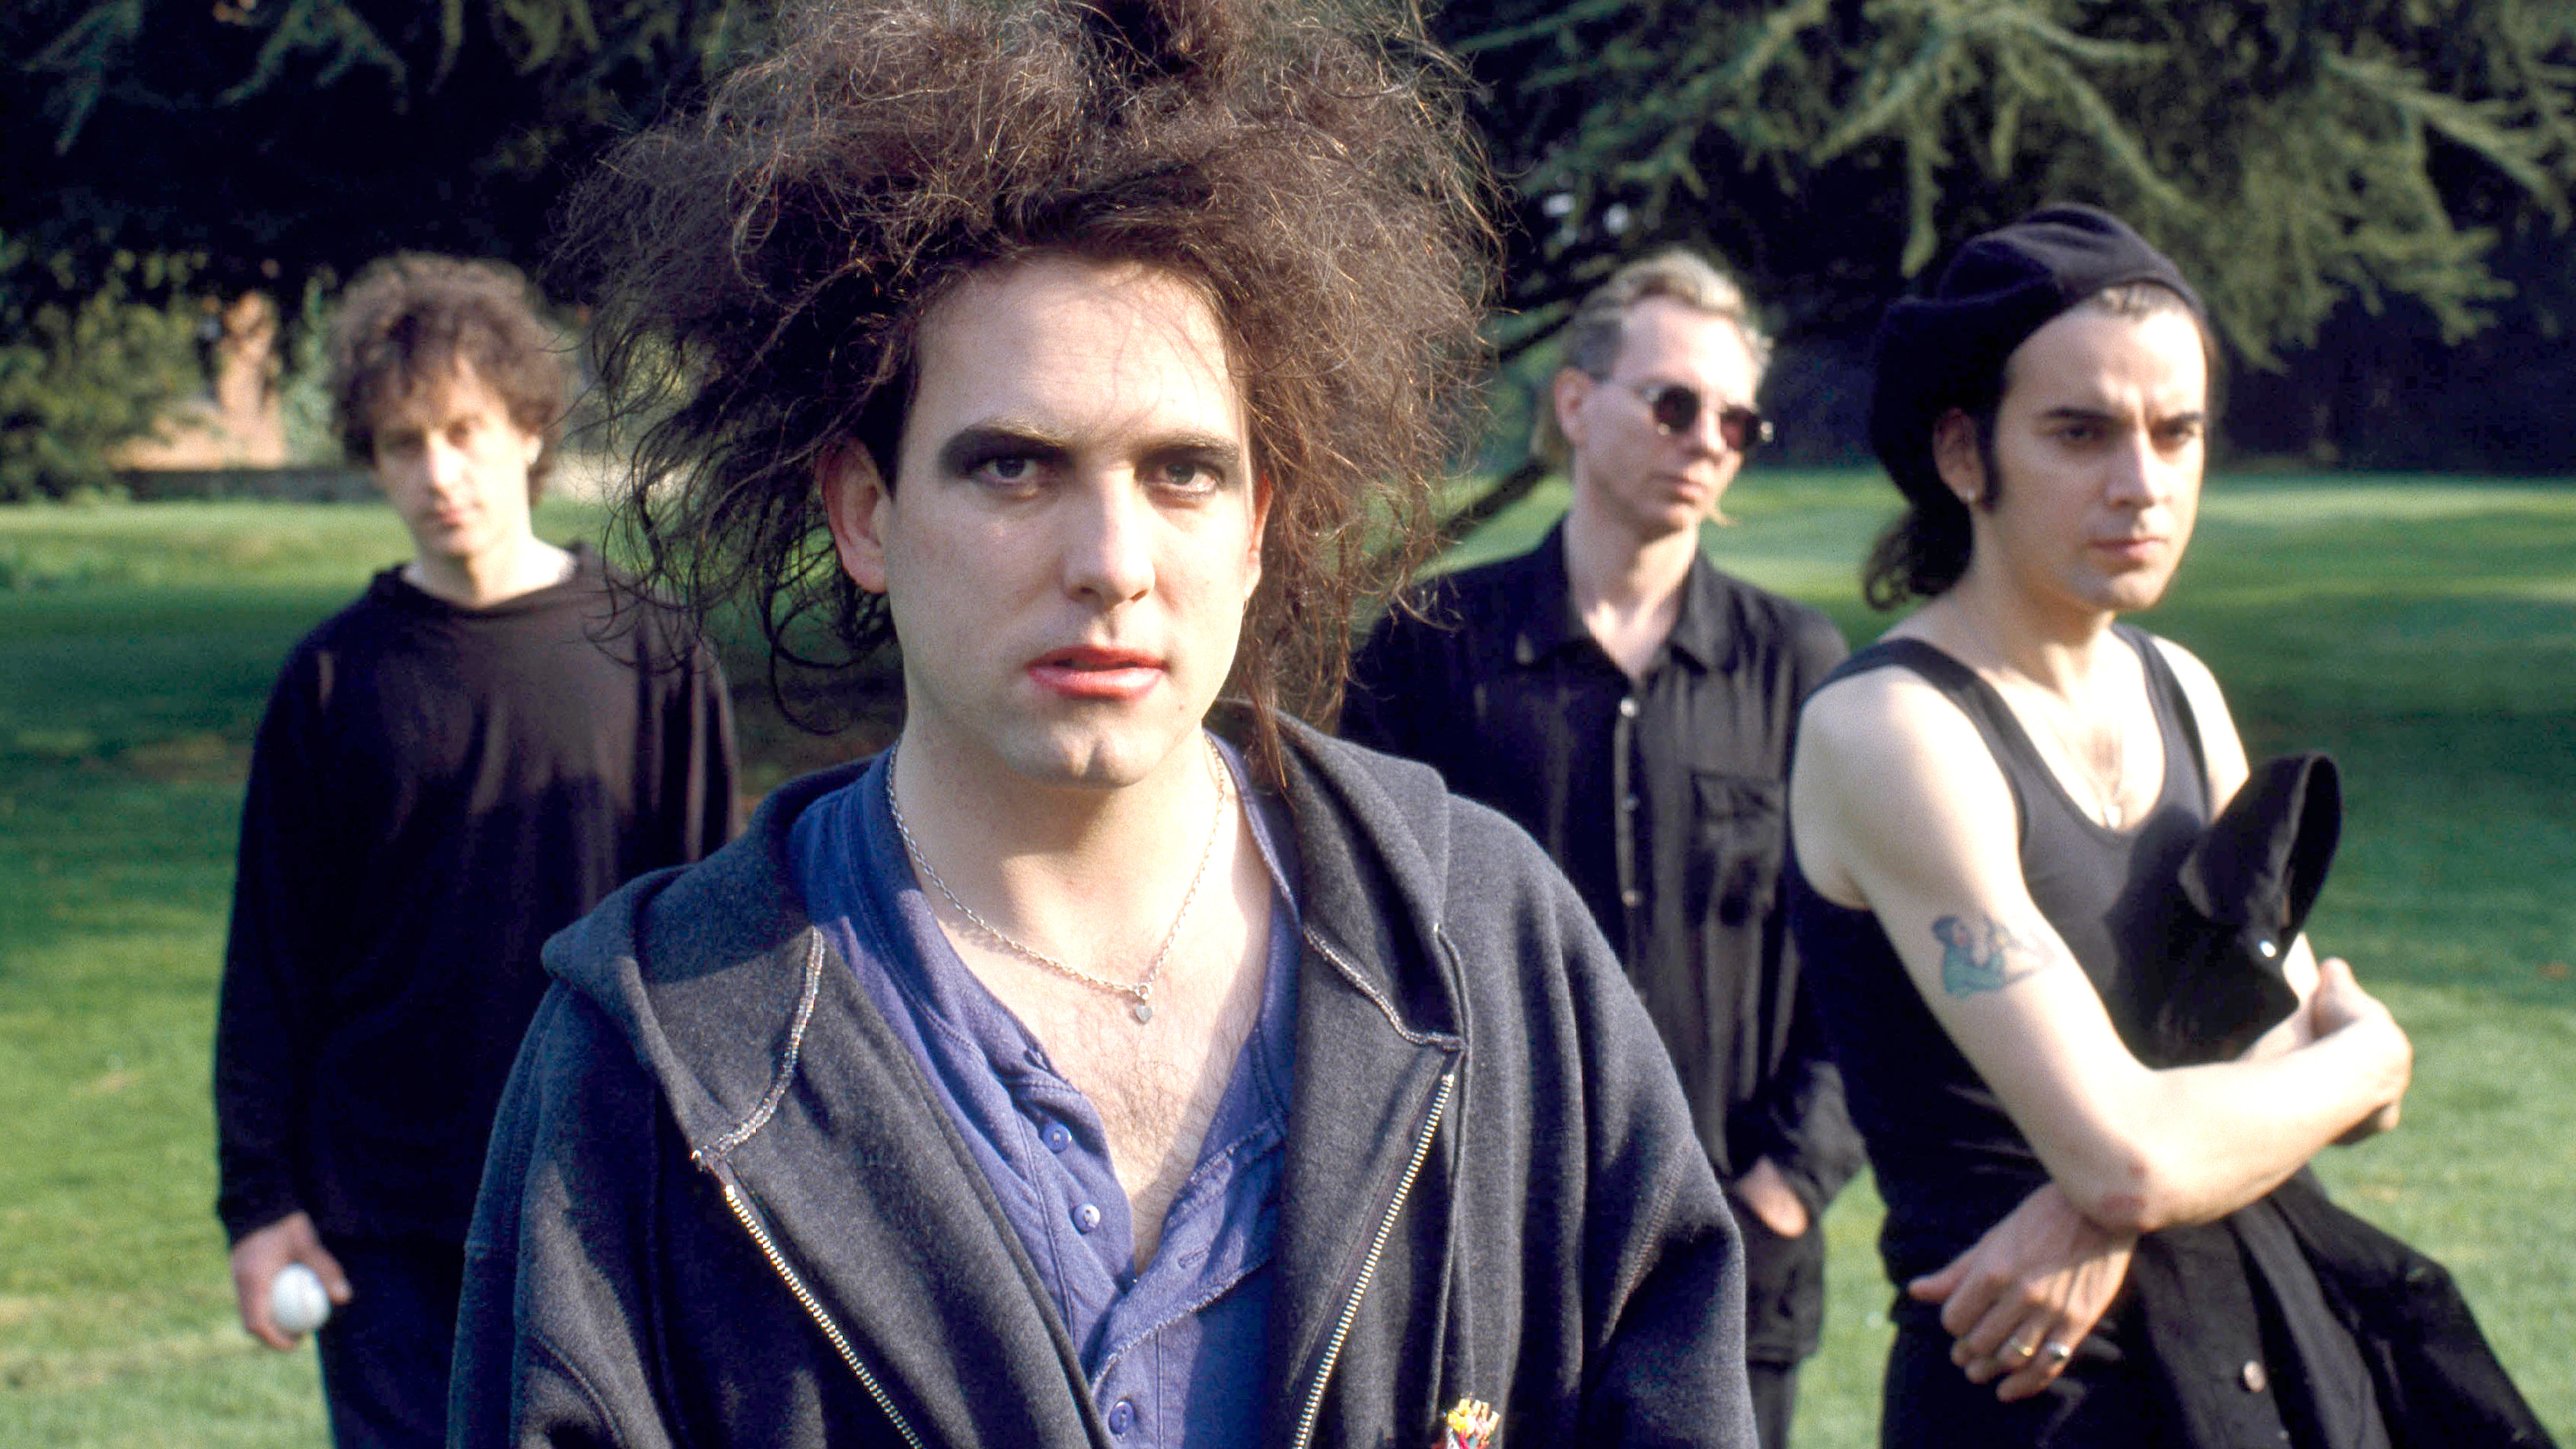 Robert Smith, The Cure frontman, Indie music icon, Rolling Stone feature, 3390x1910 HD Desktop